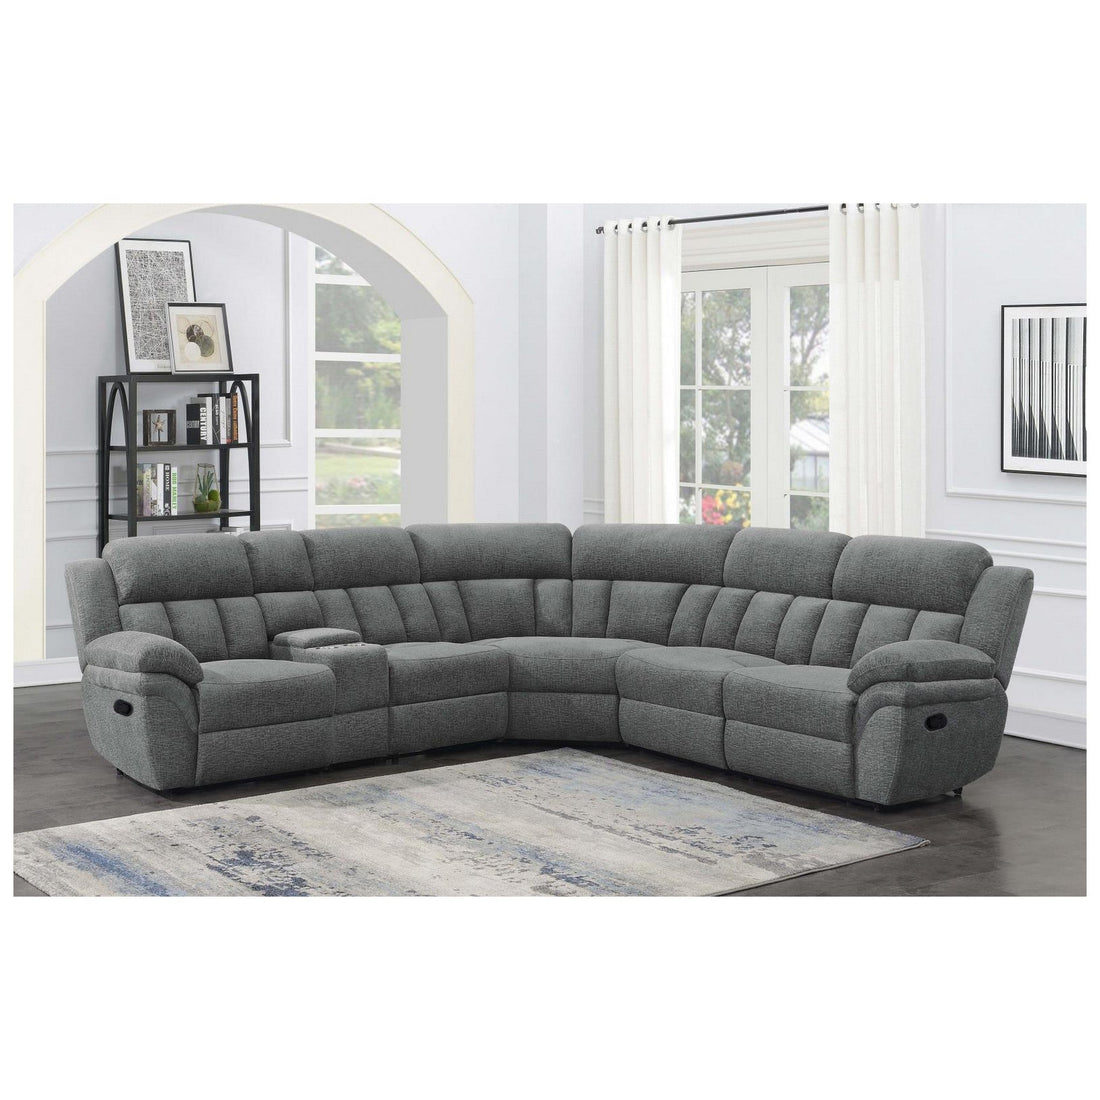 Bahrain 6-piece Upholstered Motion Sectional Charcoal 609540